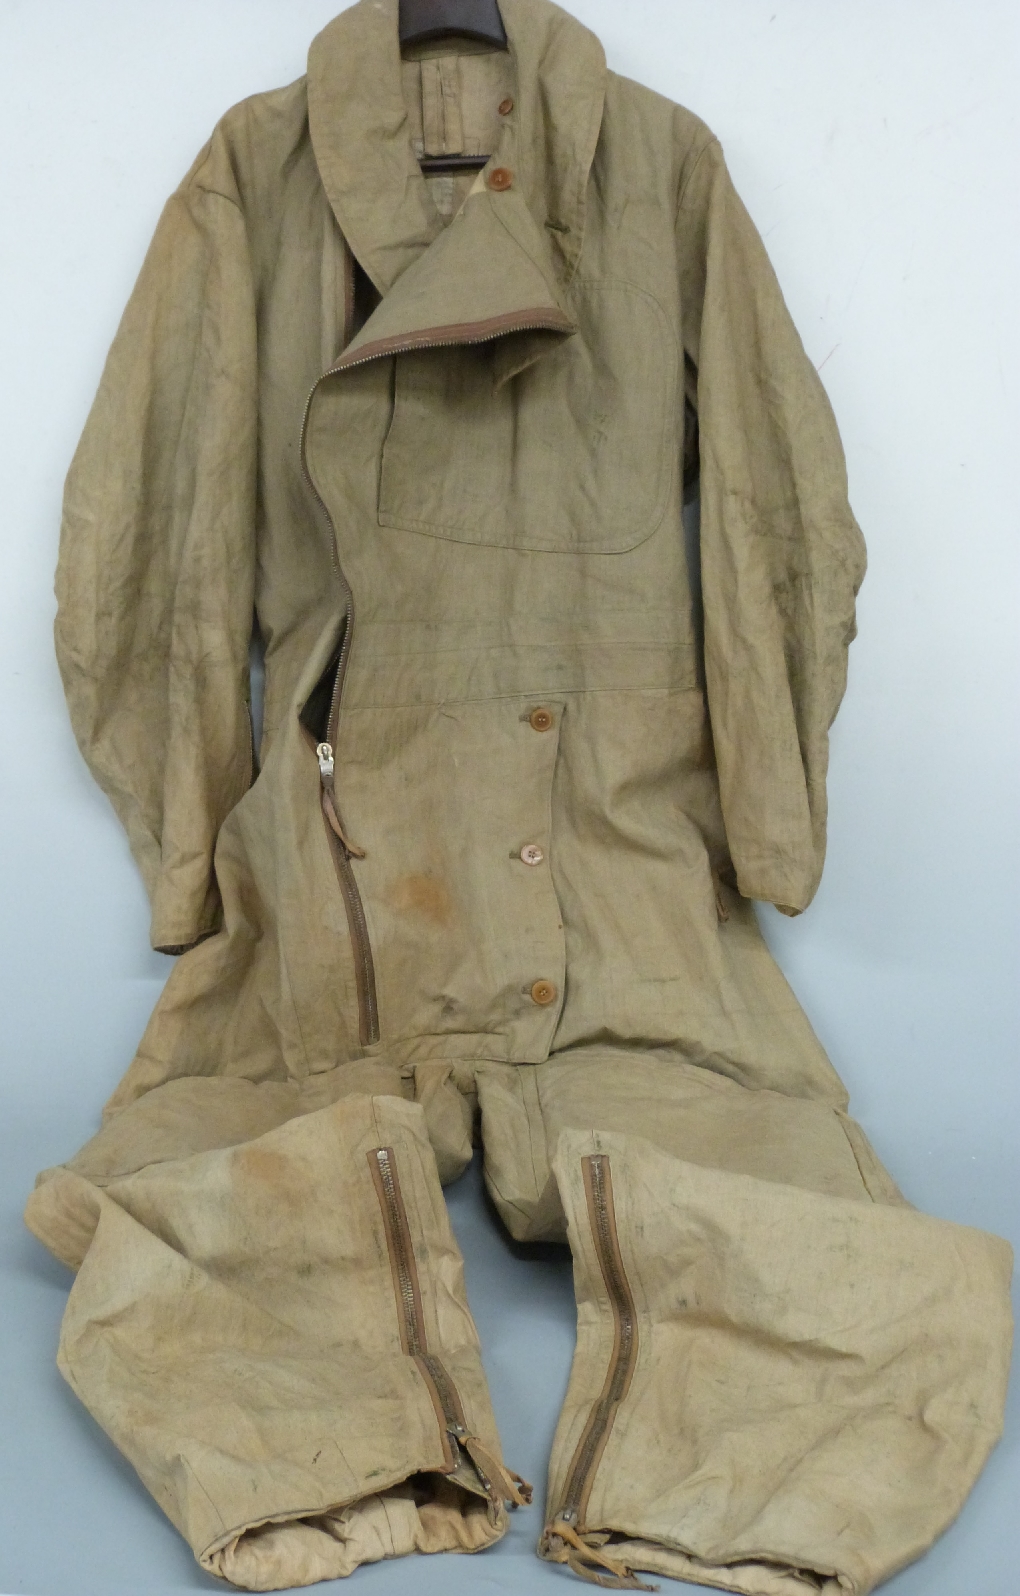 WWII Sidcot flying suit marked 'GB 3641 outer', dated 1940, size No 6,